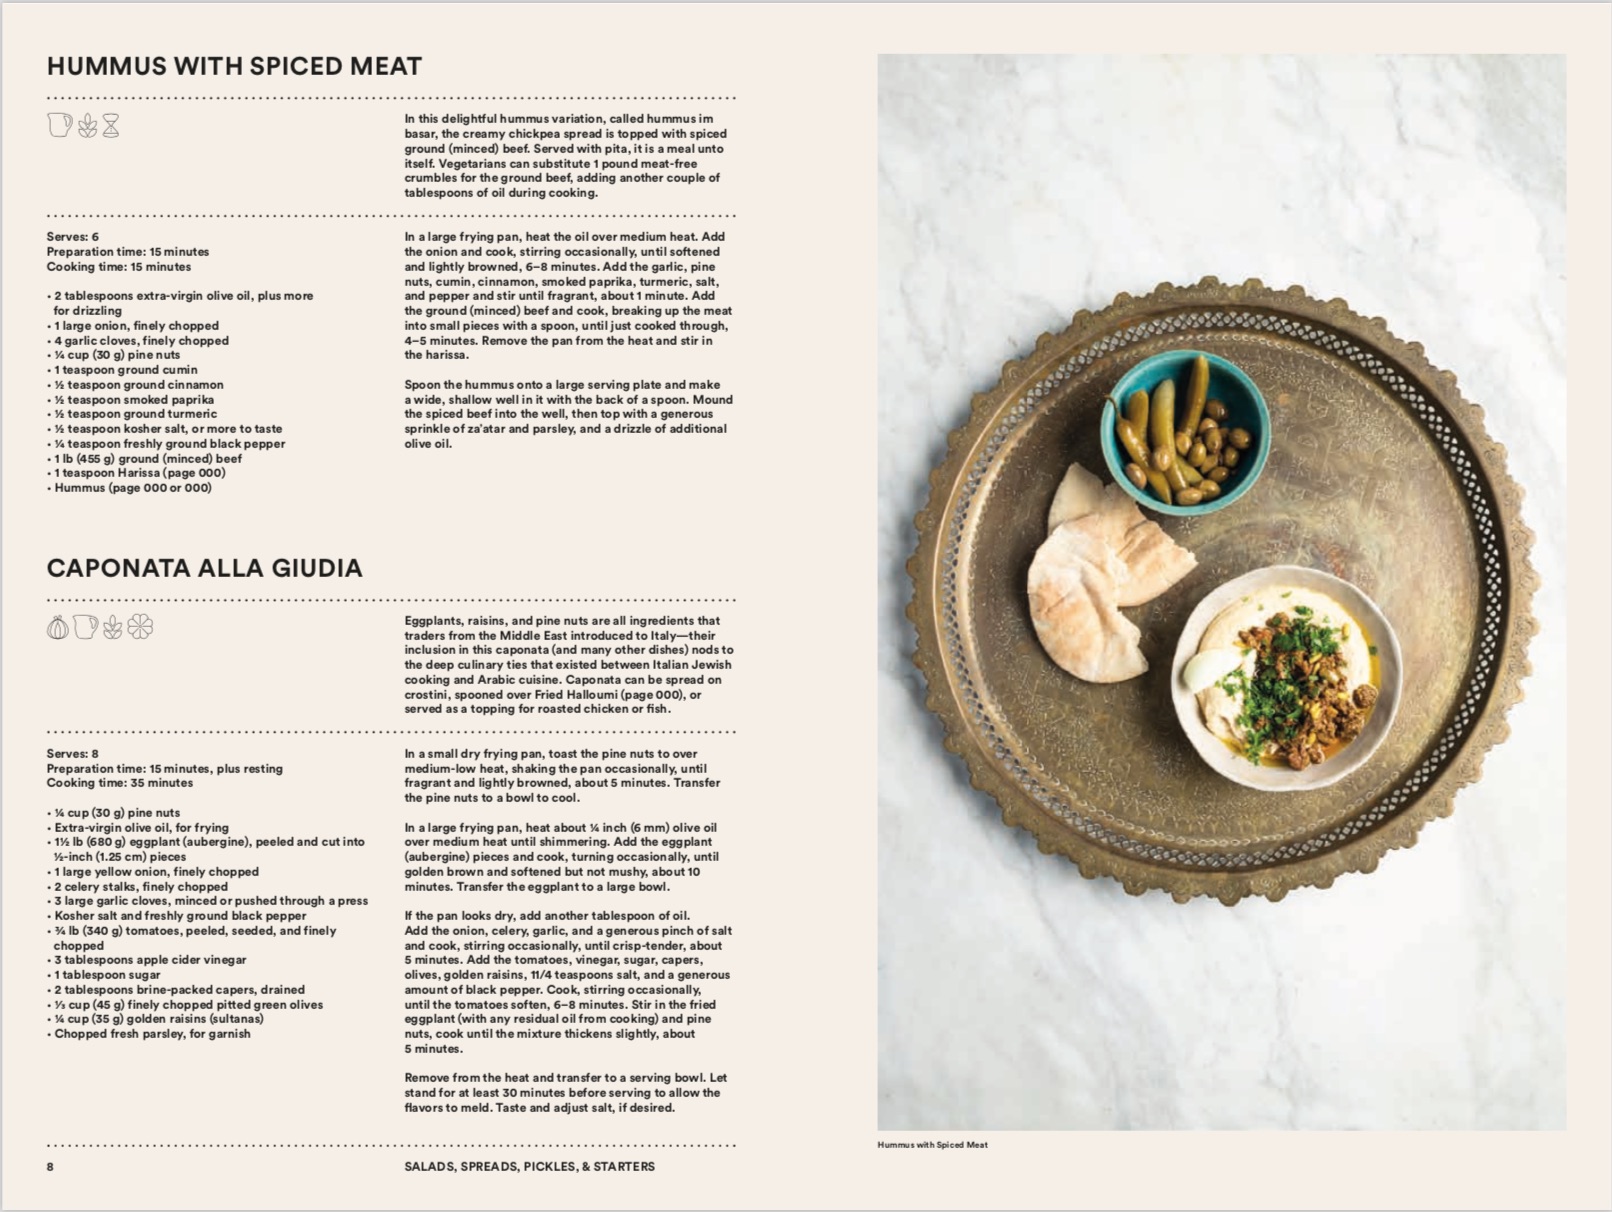 From The Jewish Cookbook copyright Phaidon 2019